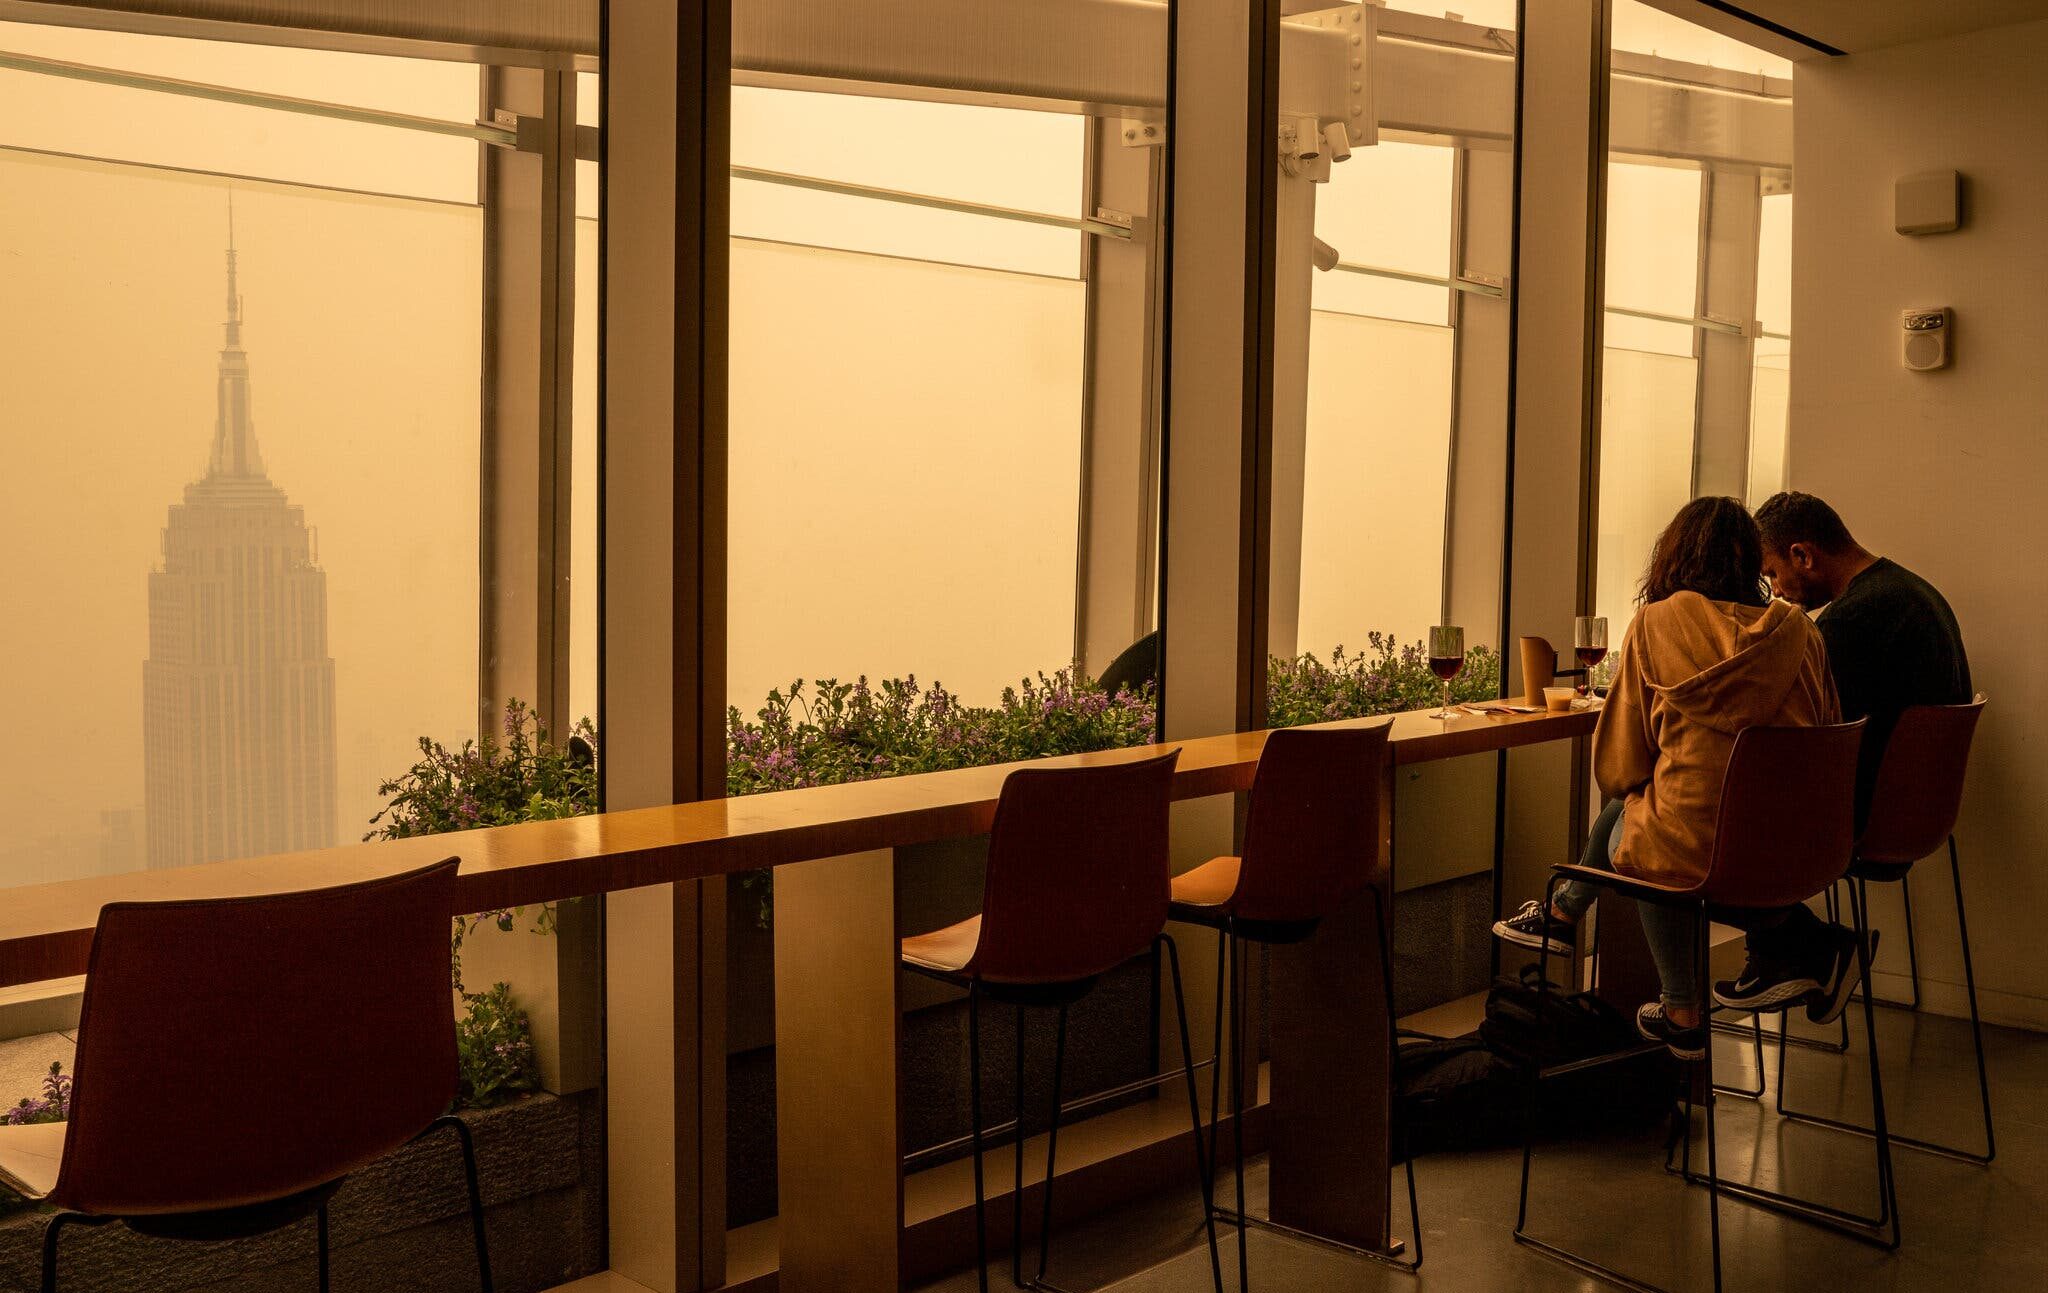 two people sitting in a room while looking out into the wildfire smog in NYC